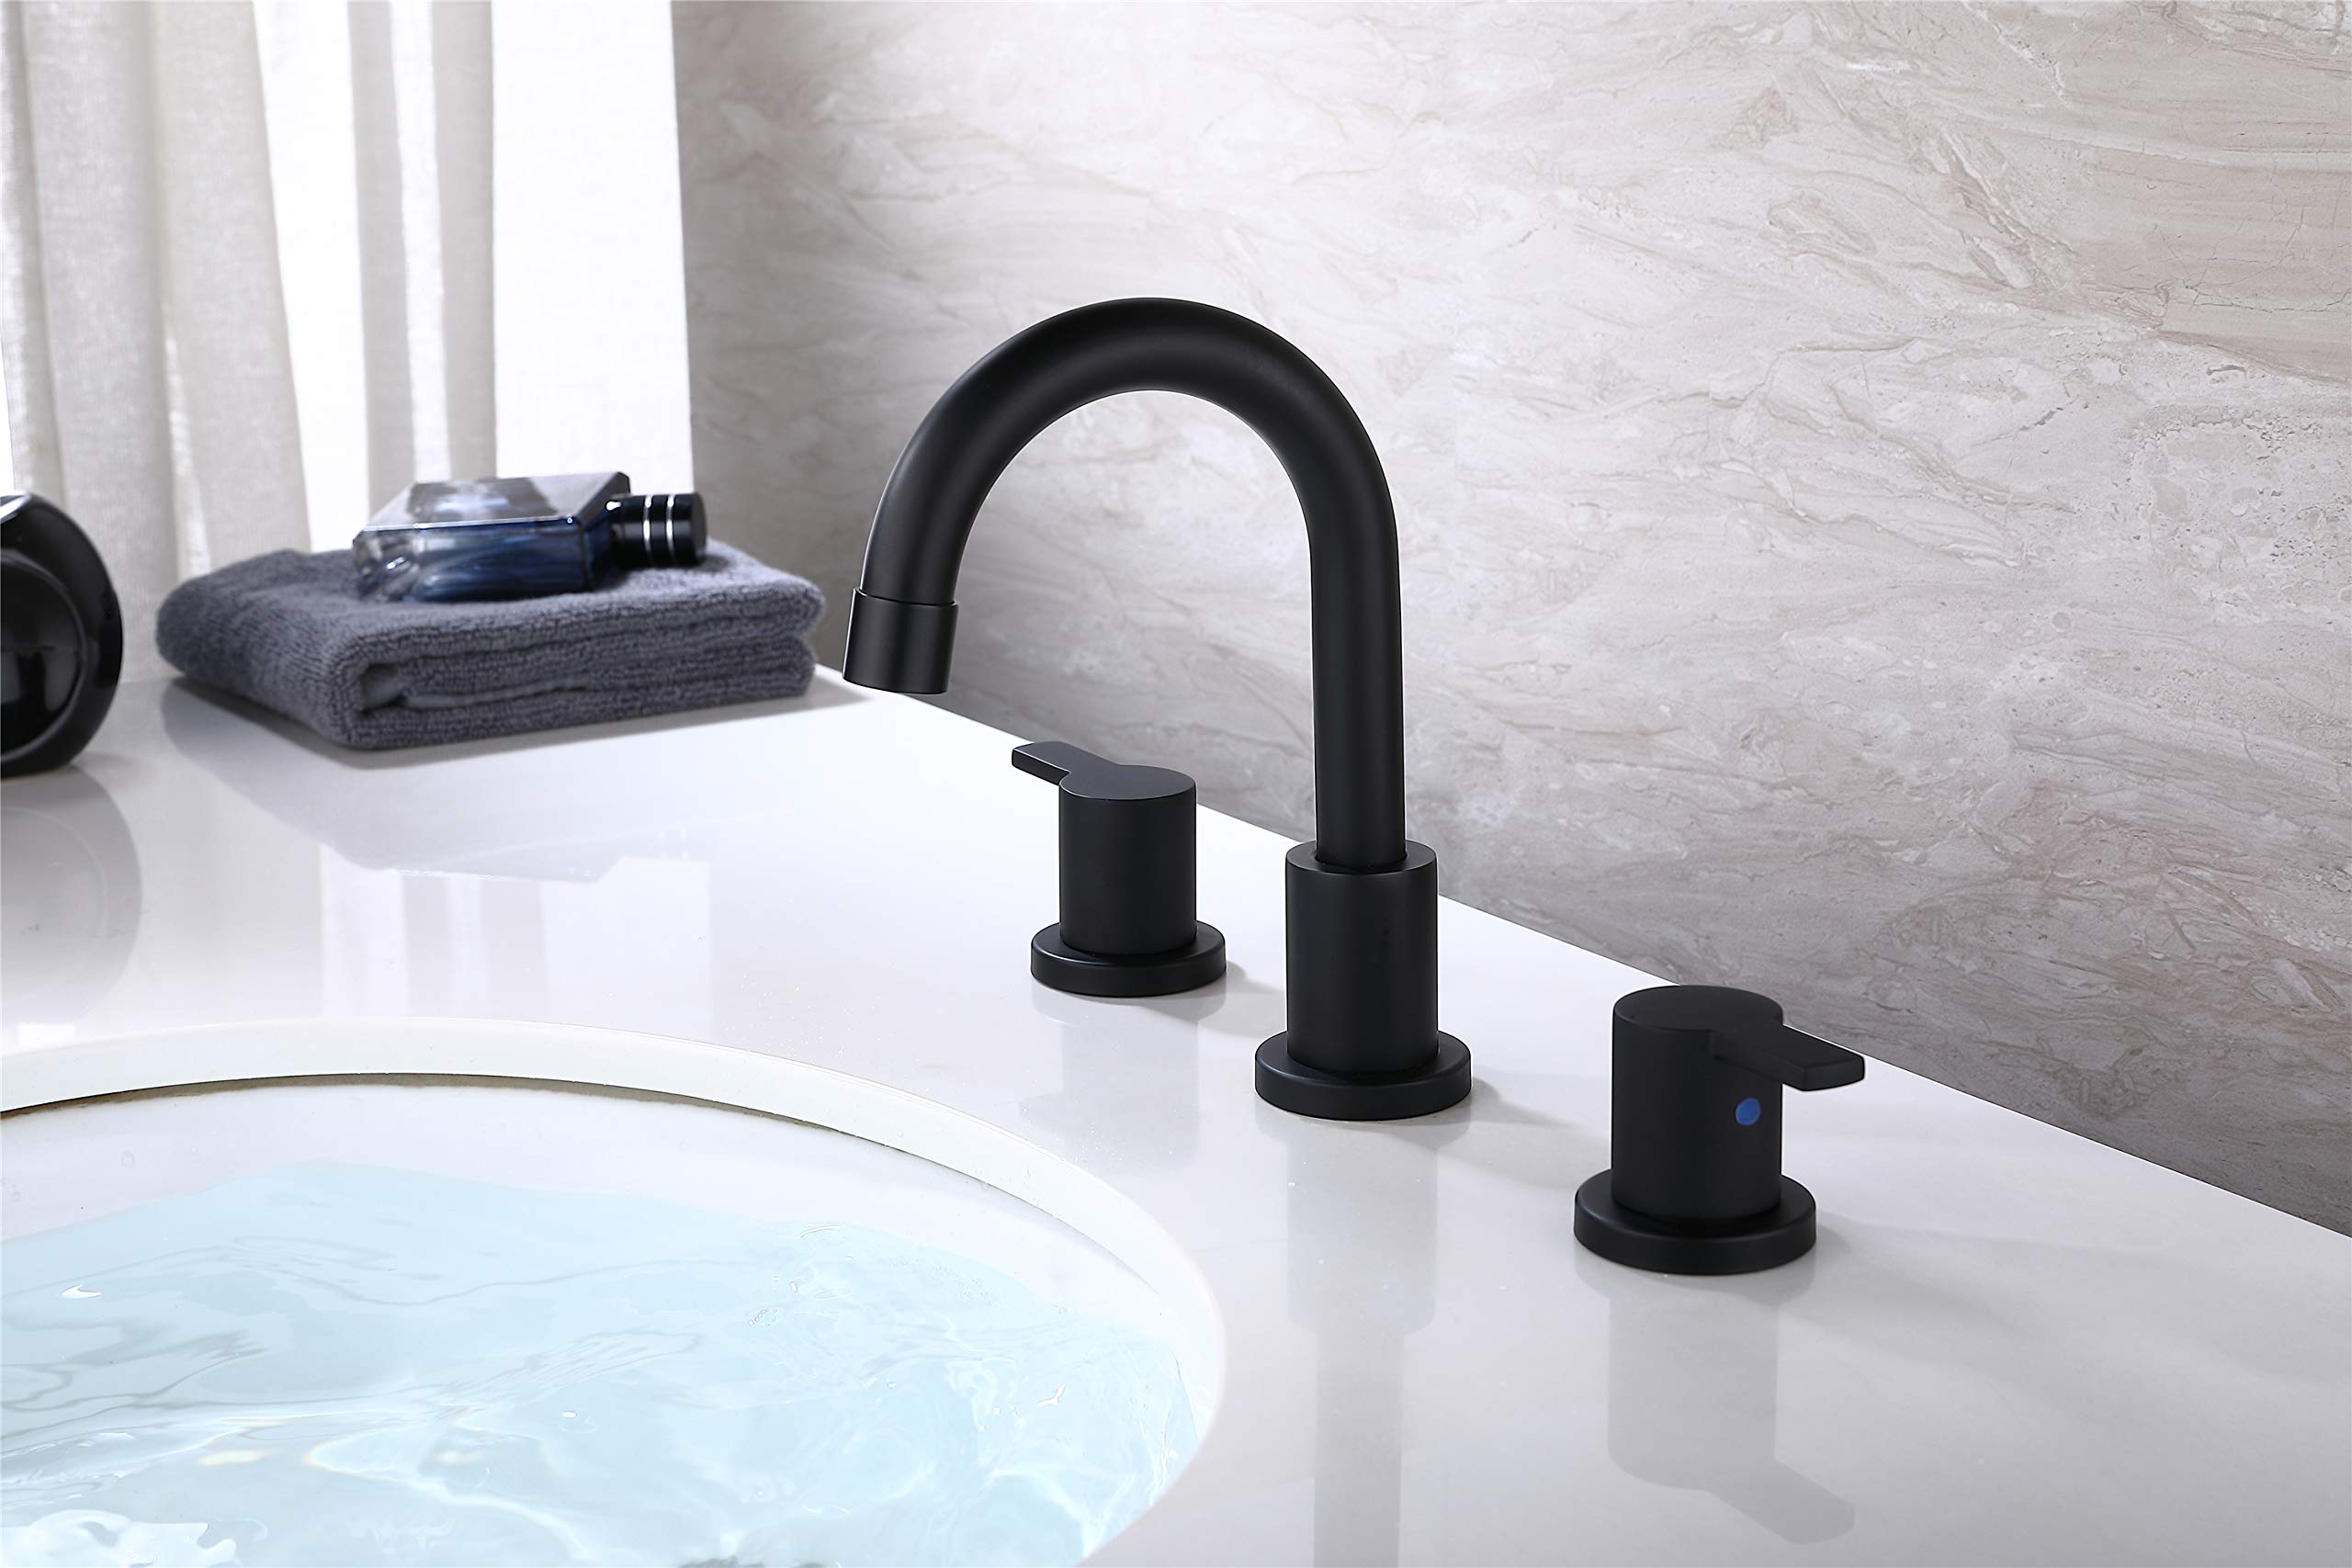 RKF Two Handle Widespread Bathroom Sink Faucet with Pop-up Drain with overflow and CUPC Faucet Supply Hoses,Matte Black,WF015-9-MB